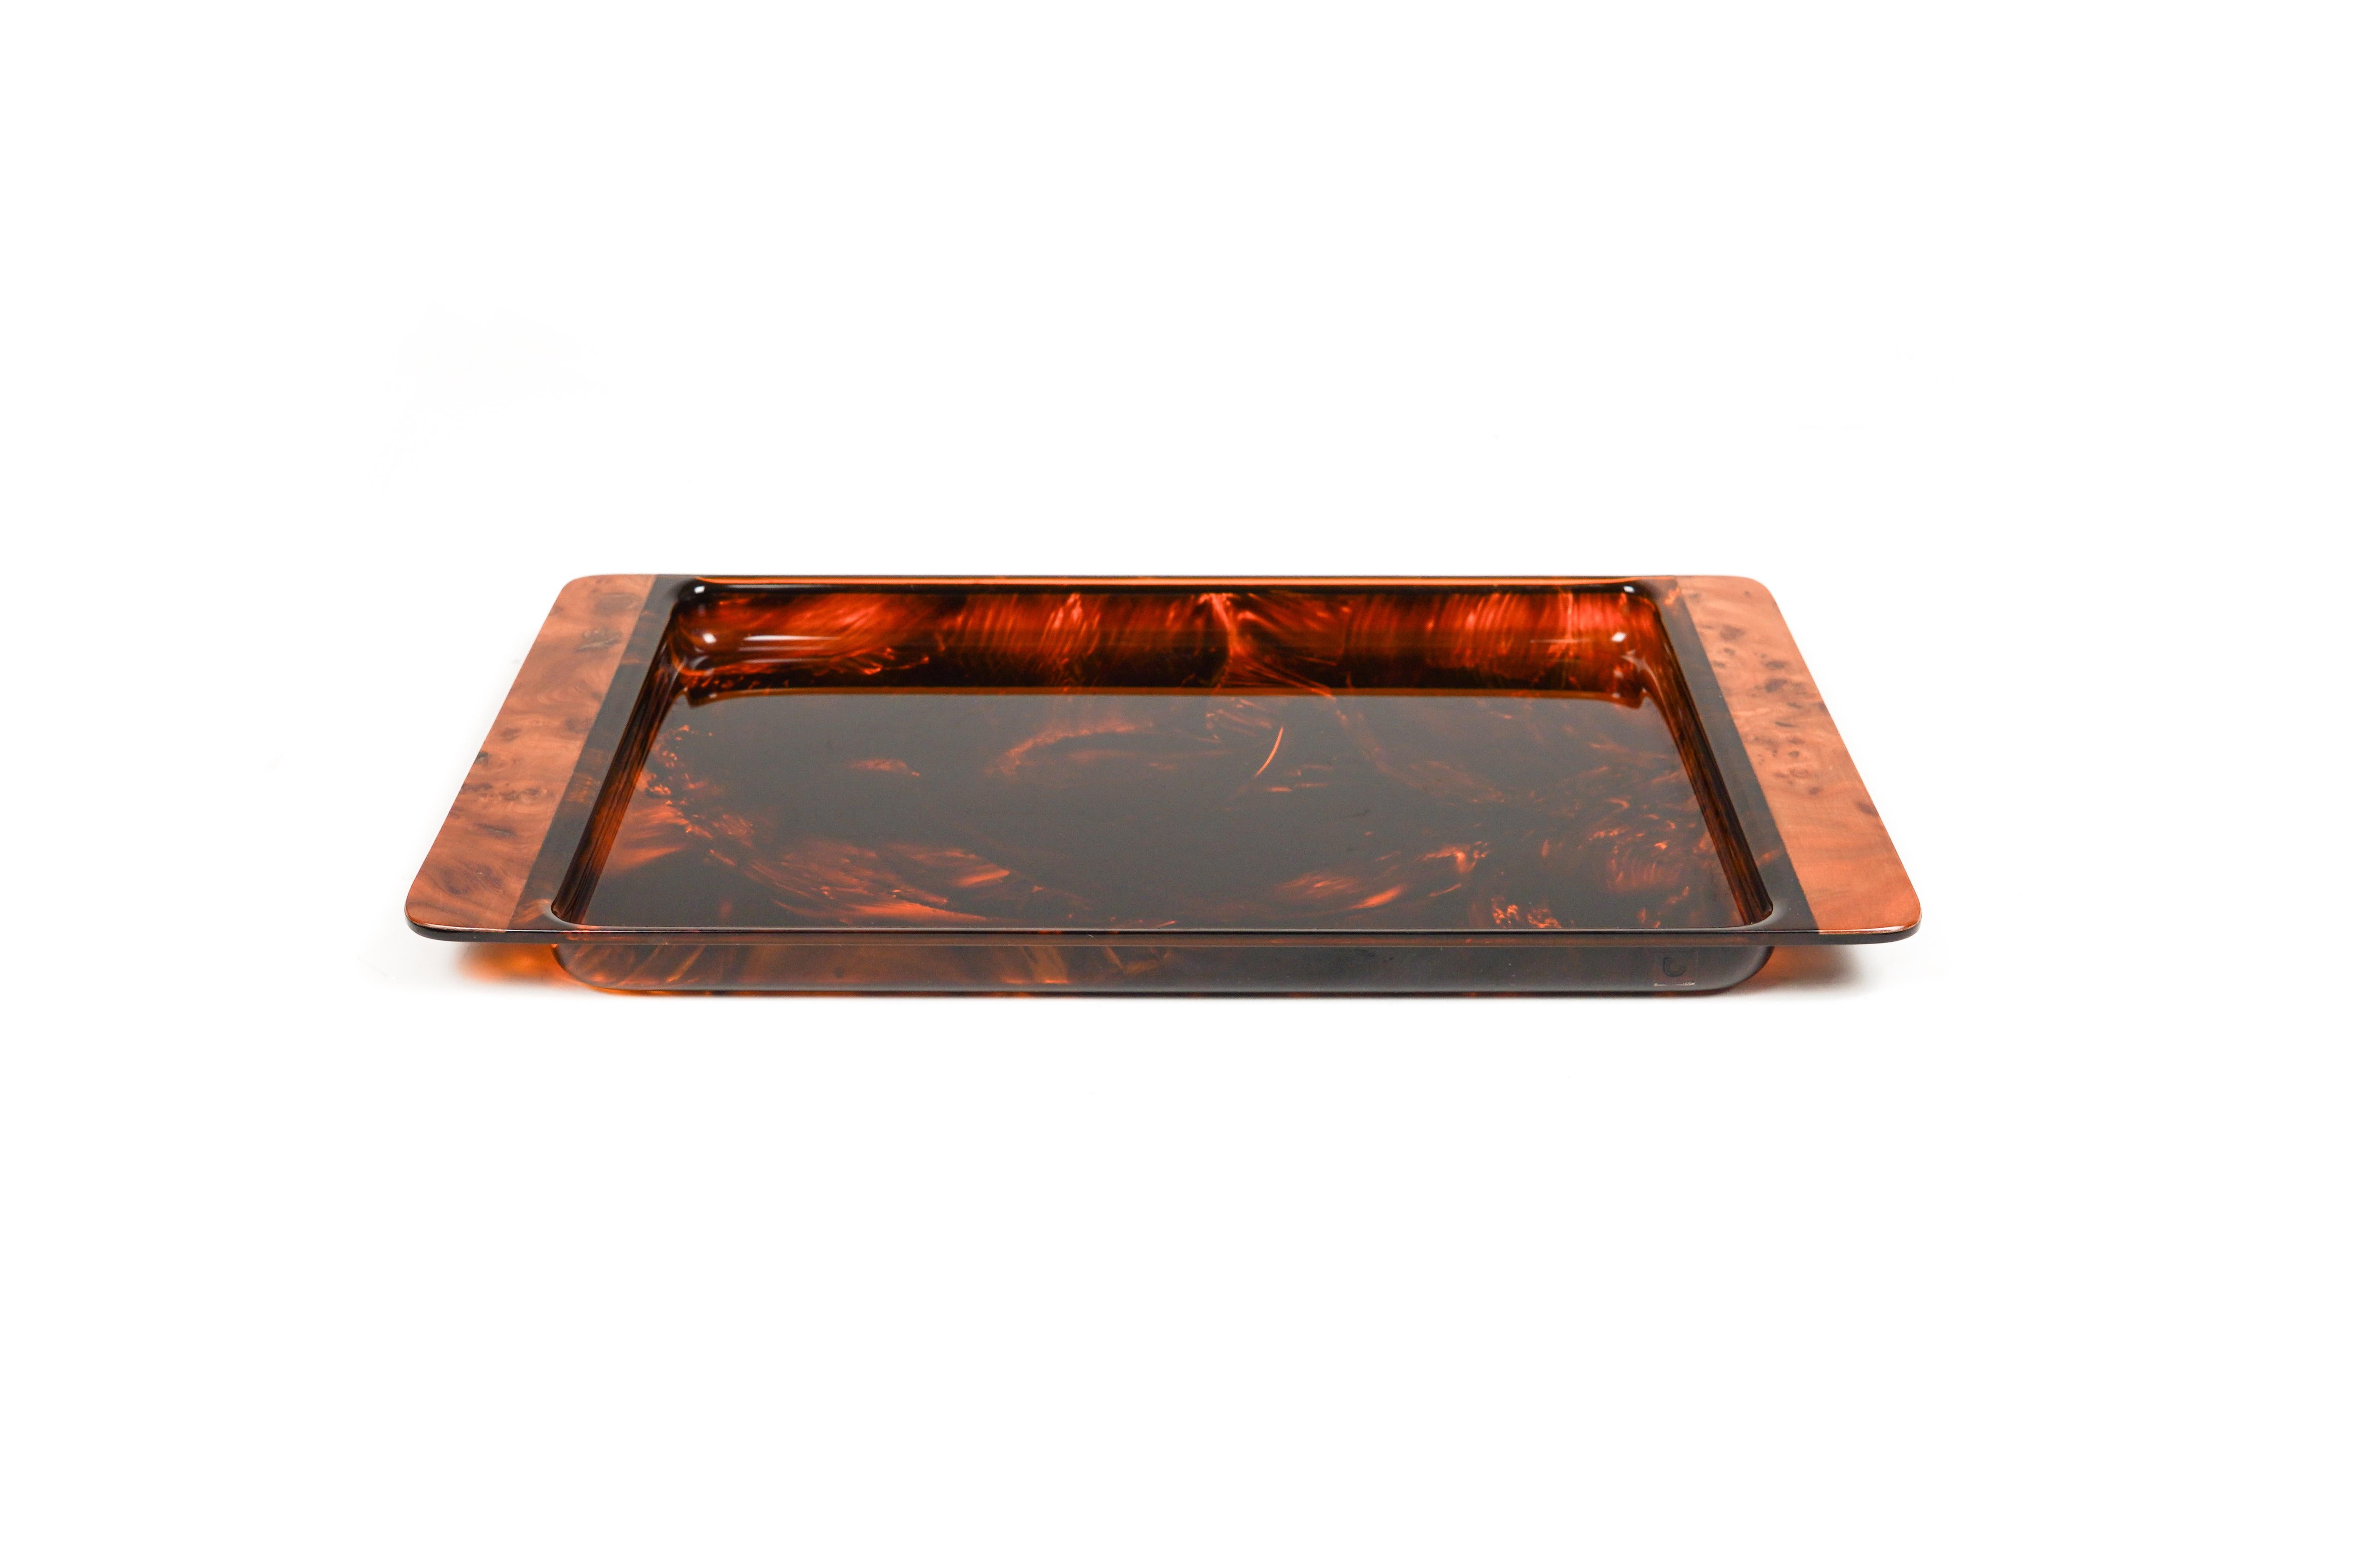 Midcentury amazing rectangular serving tray in faux tortoiseshell-effect Lucite by Team Guzzini.  

Made in Italy in the 1970s.  

The original label is still attached as shown in the pictures.  

It's an iconic tray or plate made of lucite that